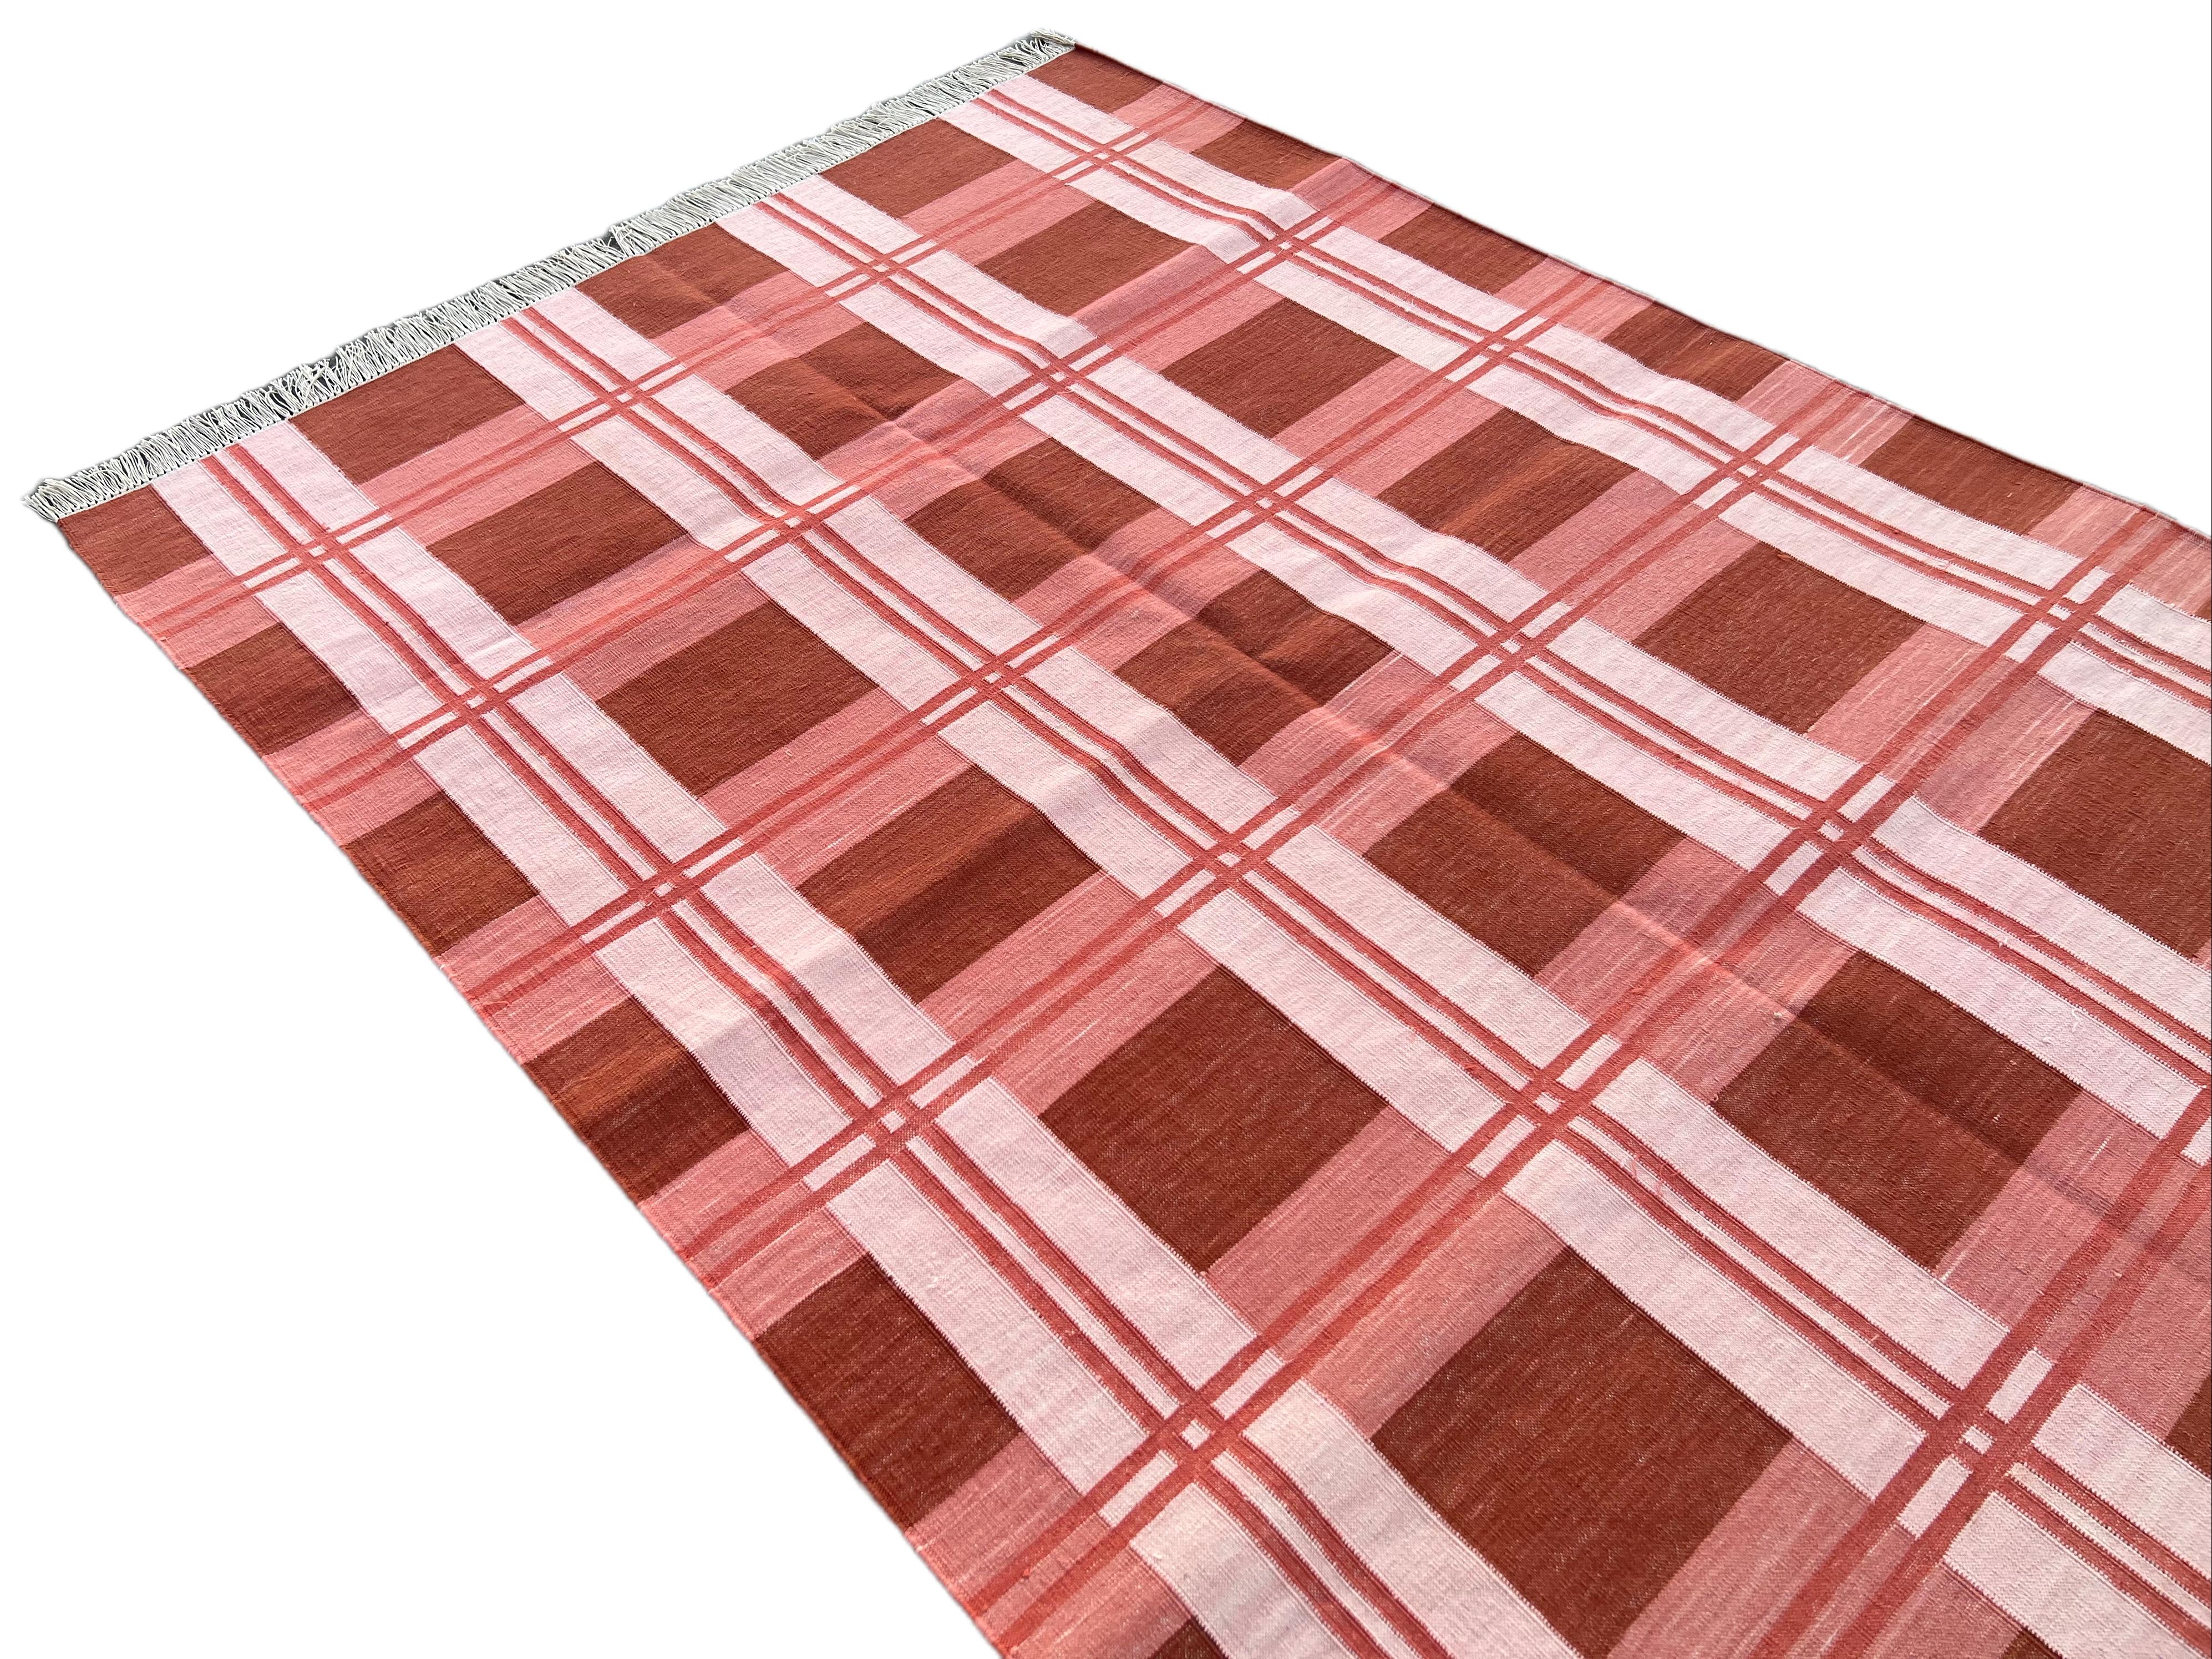 Hand-Woven Handmade Cotton Area Flat Weave Rug, 4x6 Red And Pink Checked Indian Dhurrie Rug For Sale